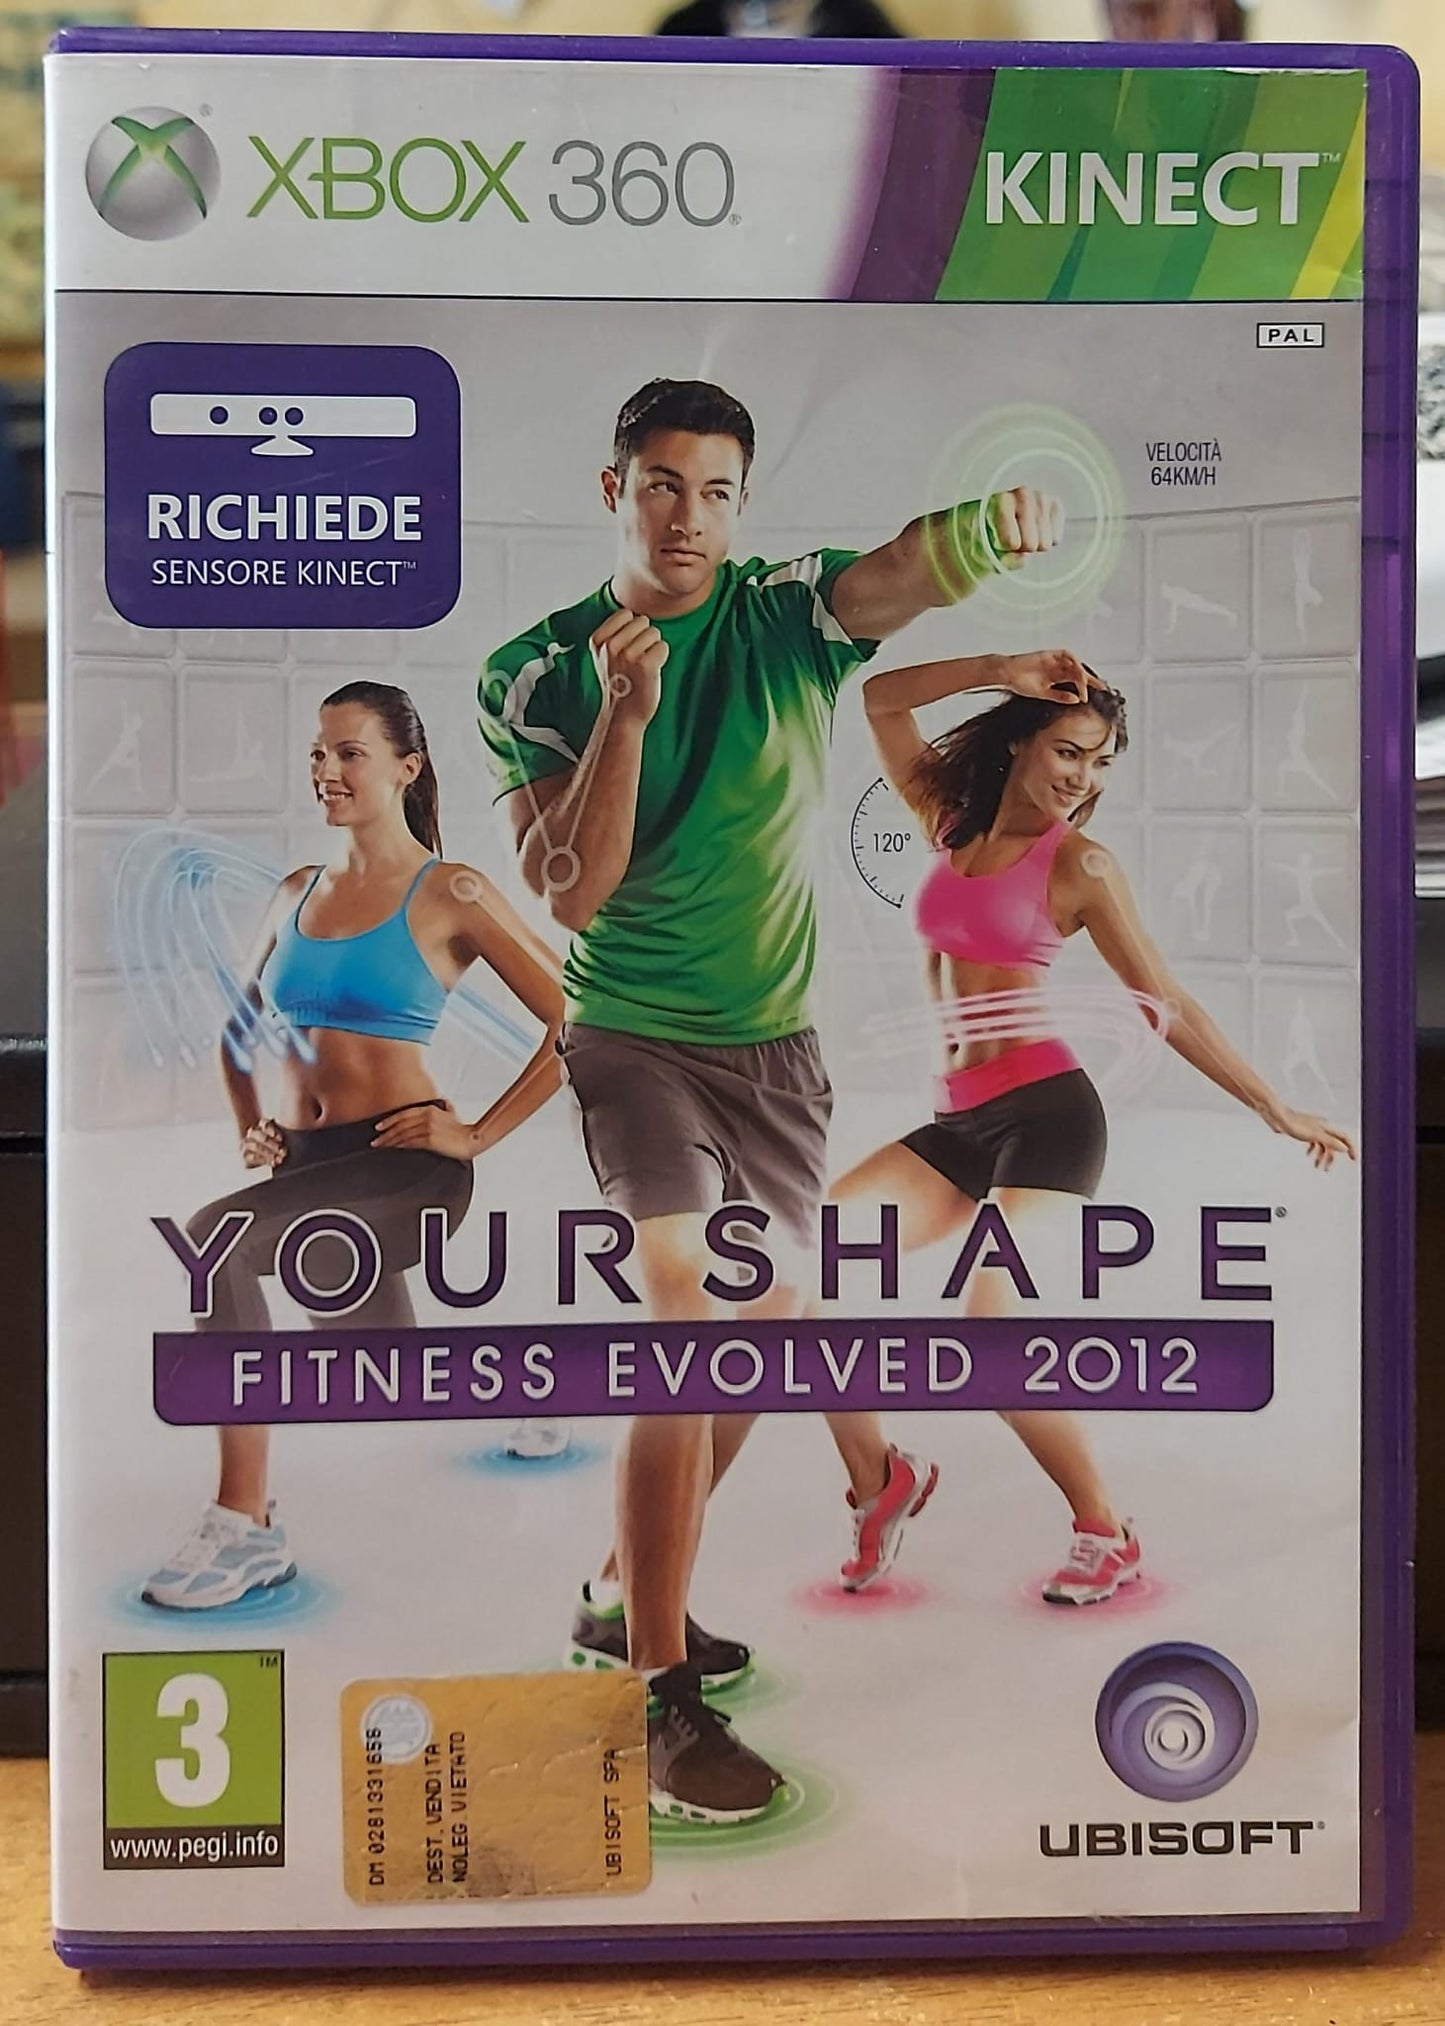 YOUR SHAPE FITNESS EVOLVED 2012 - RICHIEDE KINECT